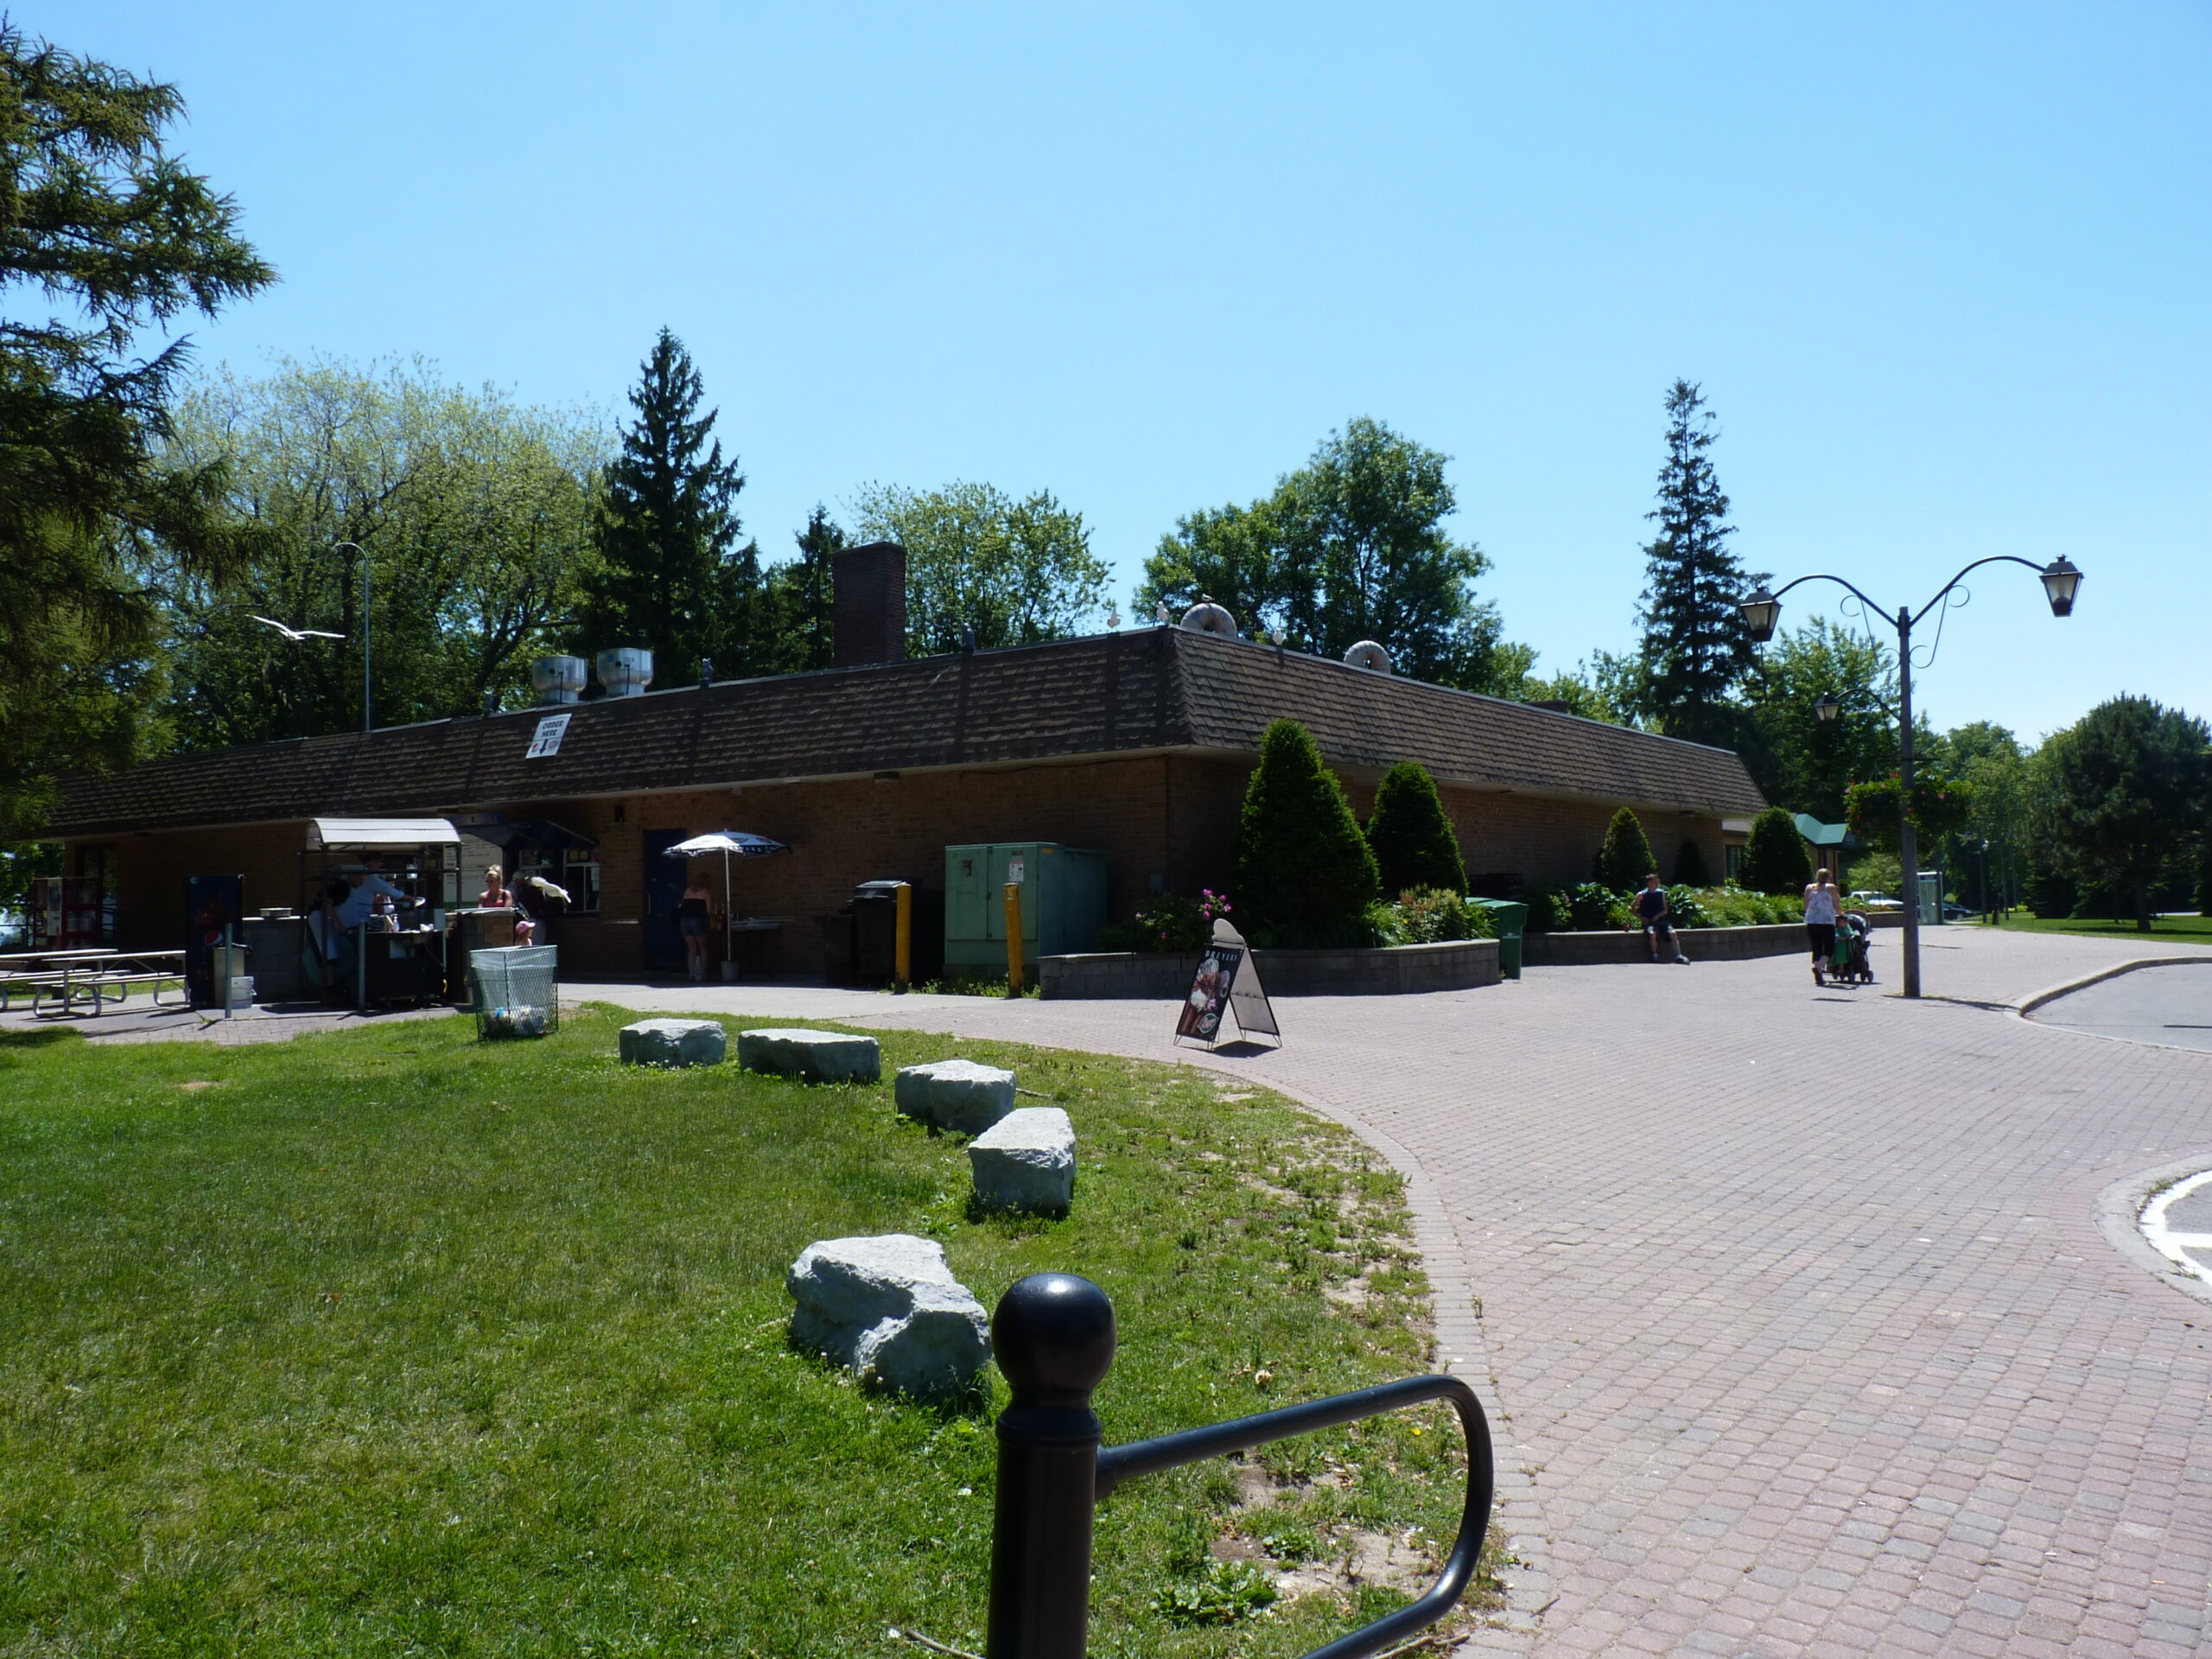 An image of a cloudless, sunny day at the Jubilee Pavilion circa 2010s, with the building's snack bar visible on the left side of the image. The image is facing west, from around 10 meters away from the building. The few people in the image are around the snack bar. There is a small sign advertising ice cream on the path heading towards the snack bar.